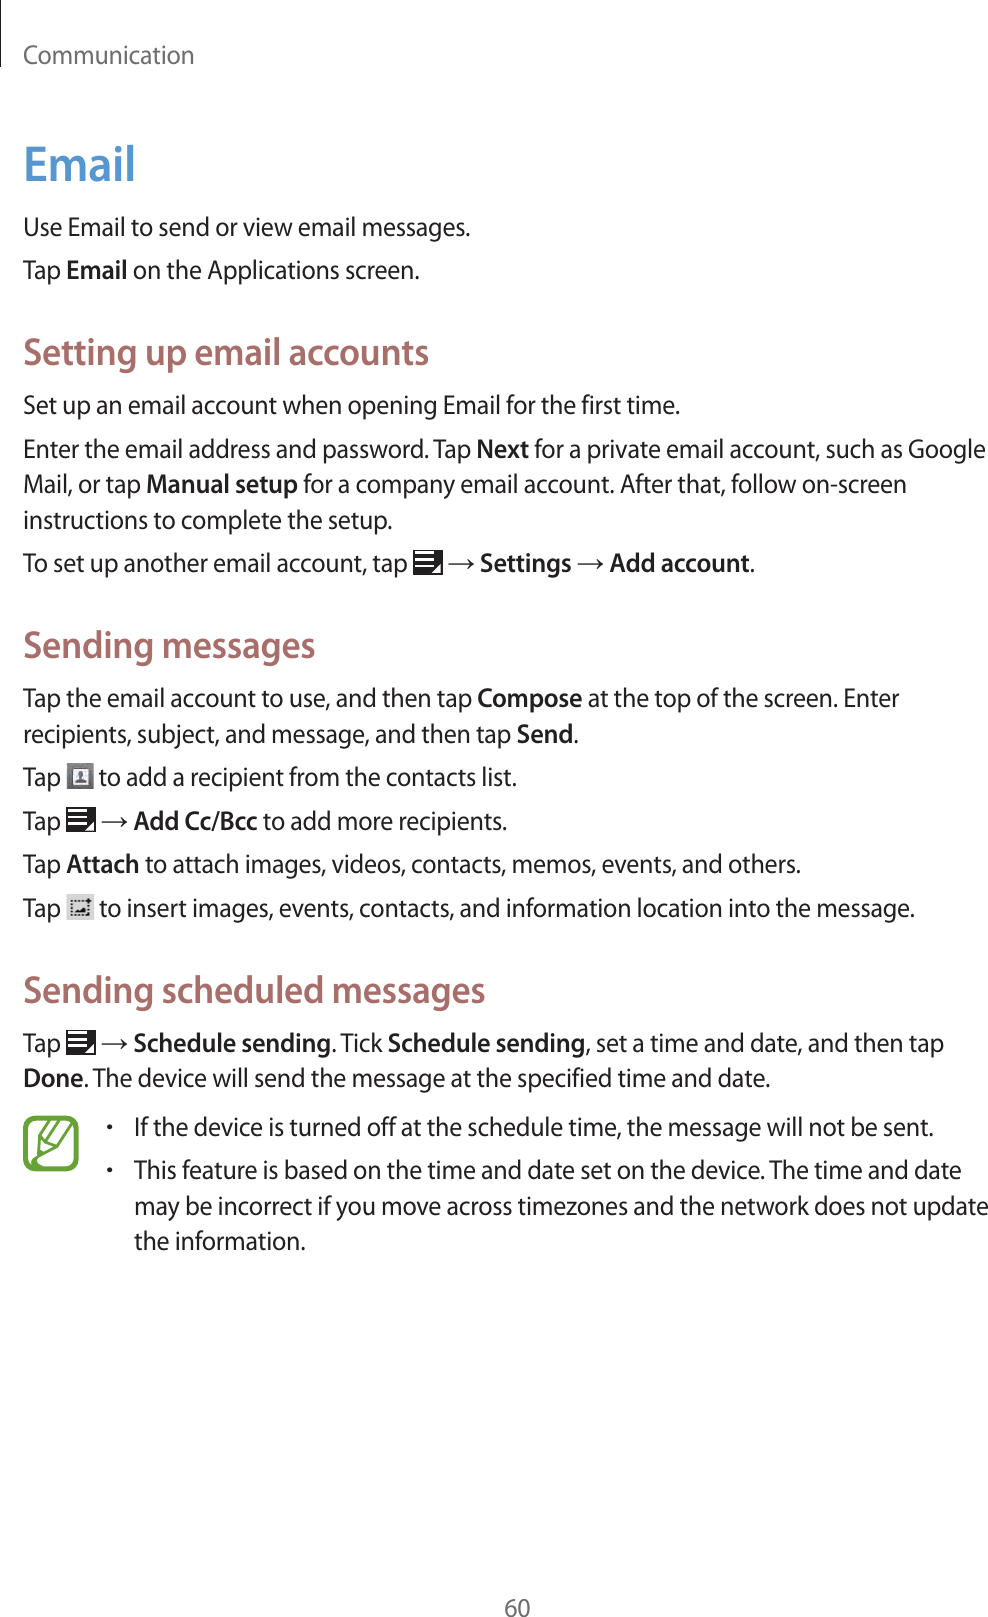 Communication60EmailUse Email to send or view email messages.Tap Email on the Applications screen.Setting up email accountsSet up an email account when opening Email for the first time.Enter the email address and password. Tap Next for a private email account, such as Google Mail, or tap Manual setup for a company email account. After that, follow on-screen instructions to complete the setup.To set up another email account, tap   ĺ Settings ĺ Add account.Sending messagesTap the email account to use, and then tap Compose at the top of the screen. Enter recipients, subject, and message, and then tap Send.Tap   to add a recipient from the contacts list.Tap   ĺ Add Cc/Bcc to add more recipients.Tap Attach to attach images, videos, contacts, memos, events, and others.Tap   to insert images, events, contacts, and information location into the message.Sending scheduled messagesTap   ĺ Schedule sending. Tick Schedule sending, set a time and date, and then tap Done. The device will send the message at the specified time and date.rIf the device is turned off at the schedule time, the message will not be sent.rThis feature is based on the time and date set on the device. The time and date may be incorrect if you move across timezones and the network does not update the information.